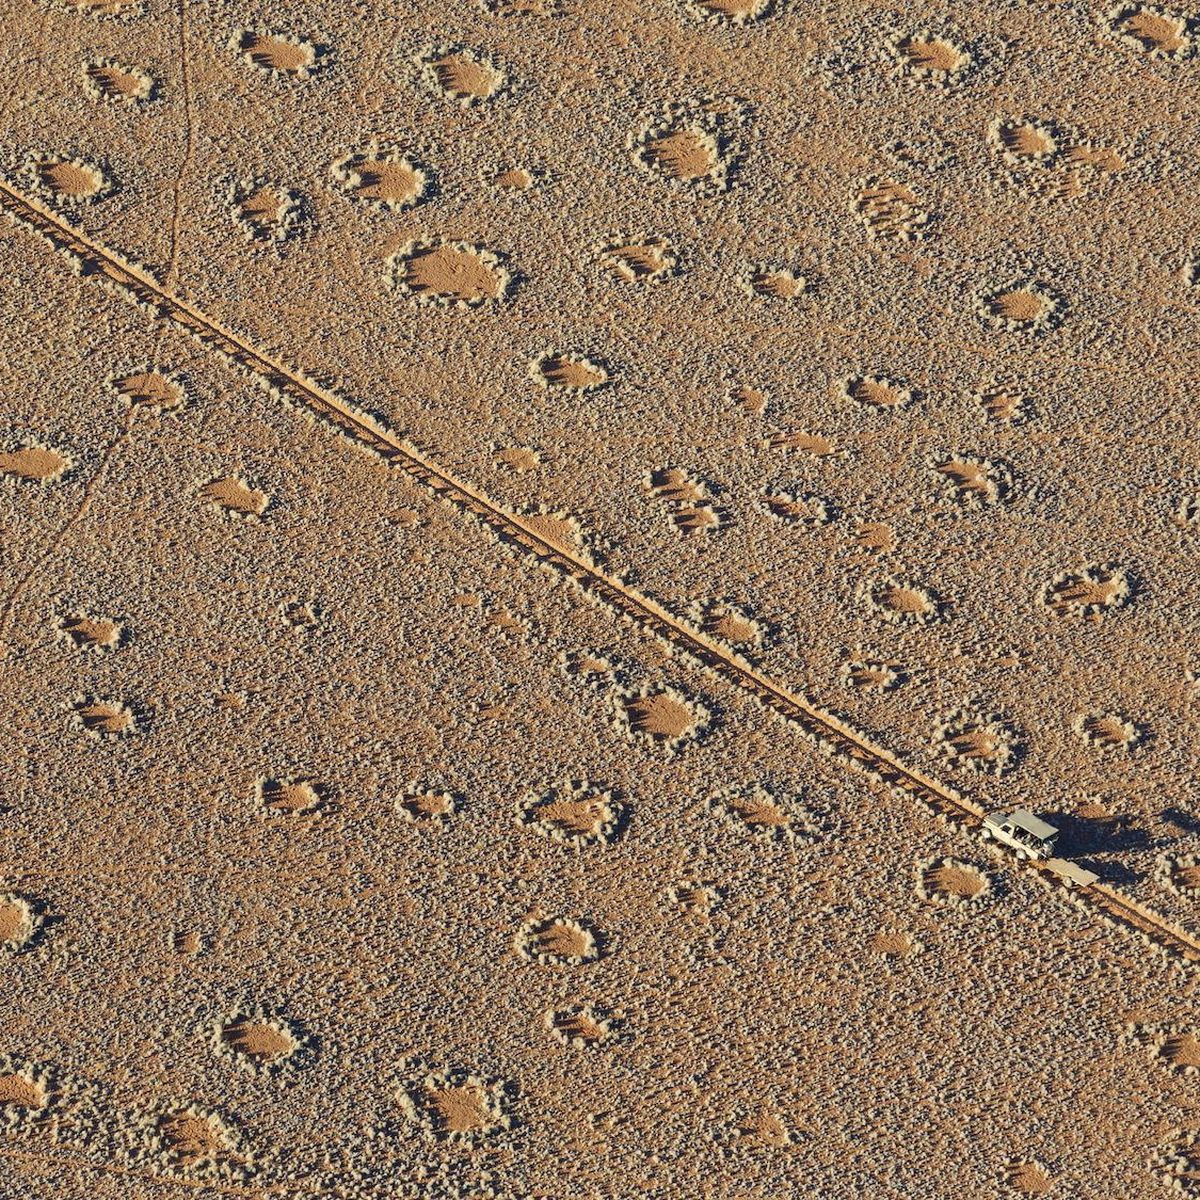 Termites as cause of fairy circles in Namib Desert confirmed